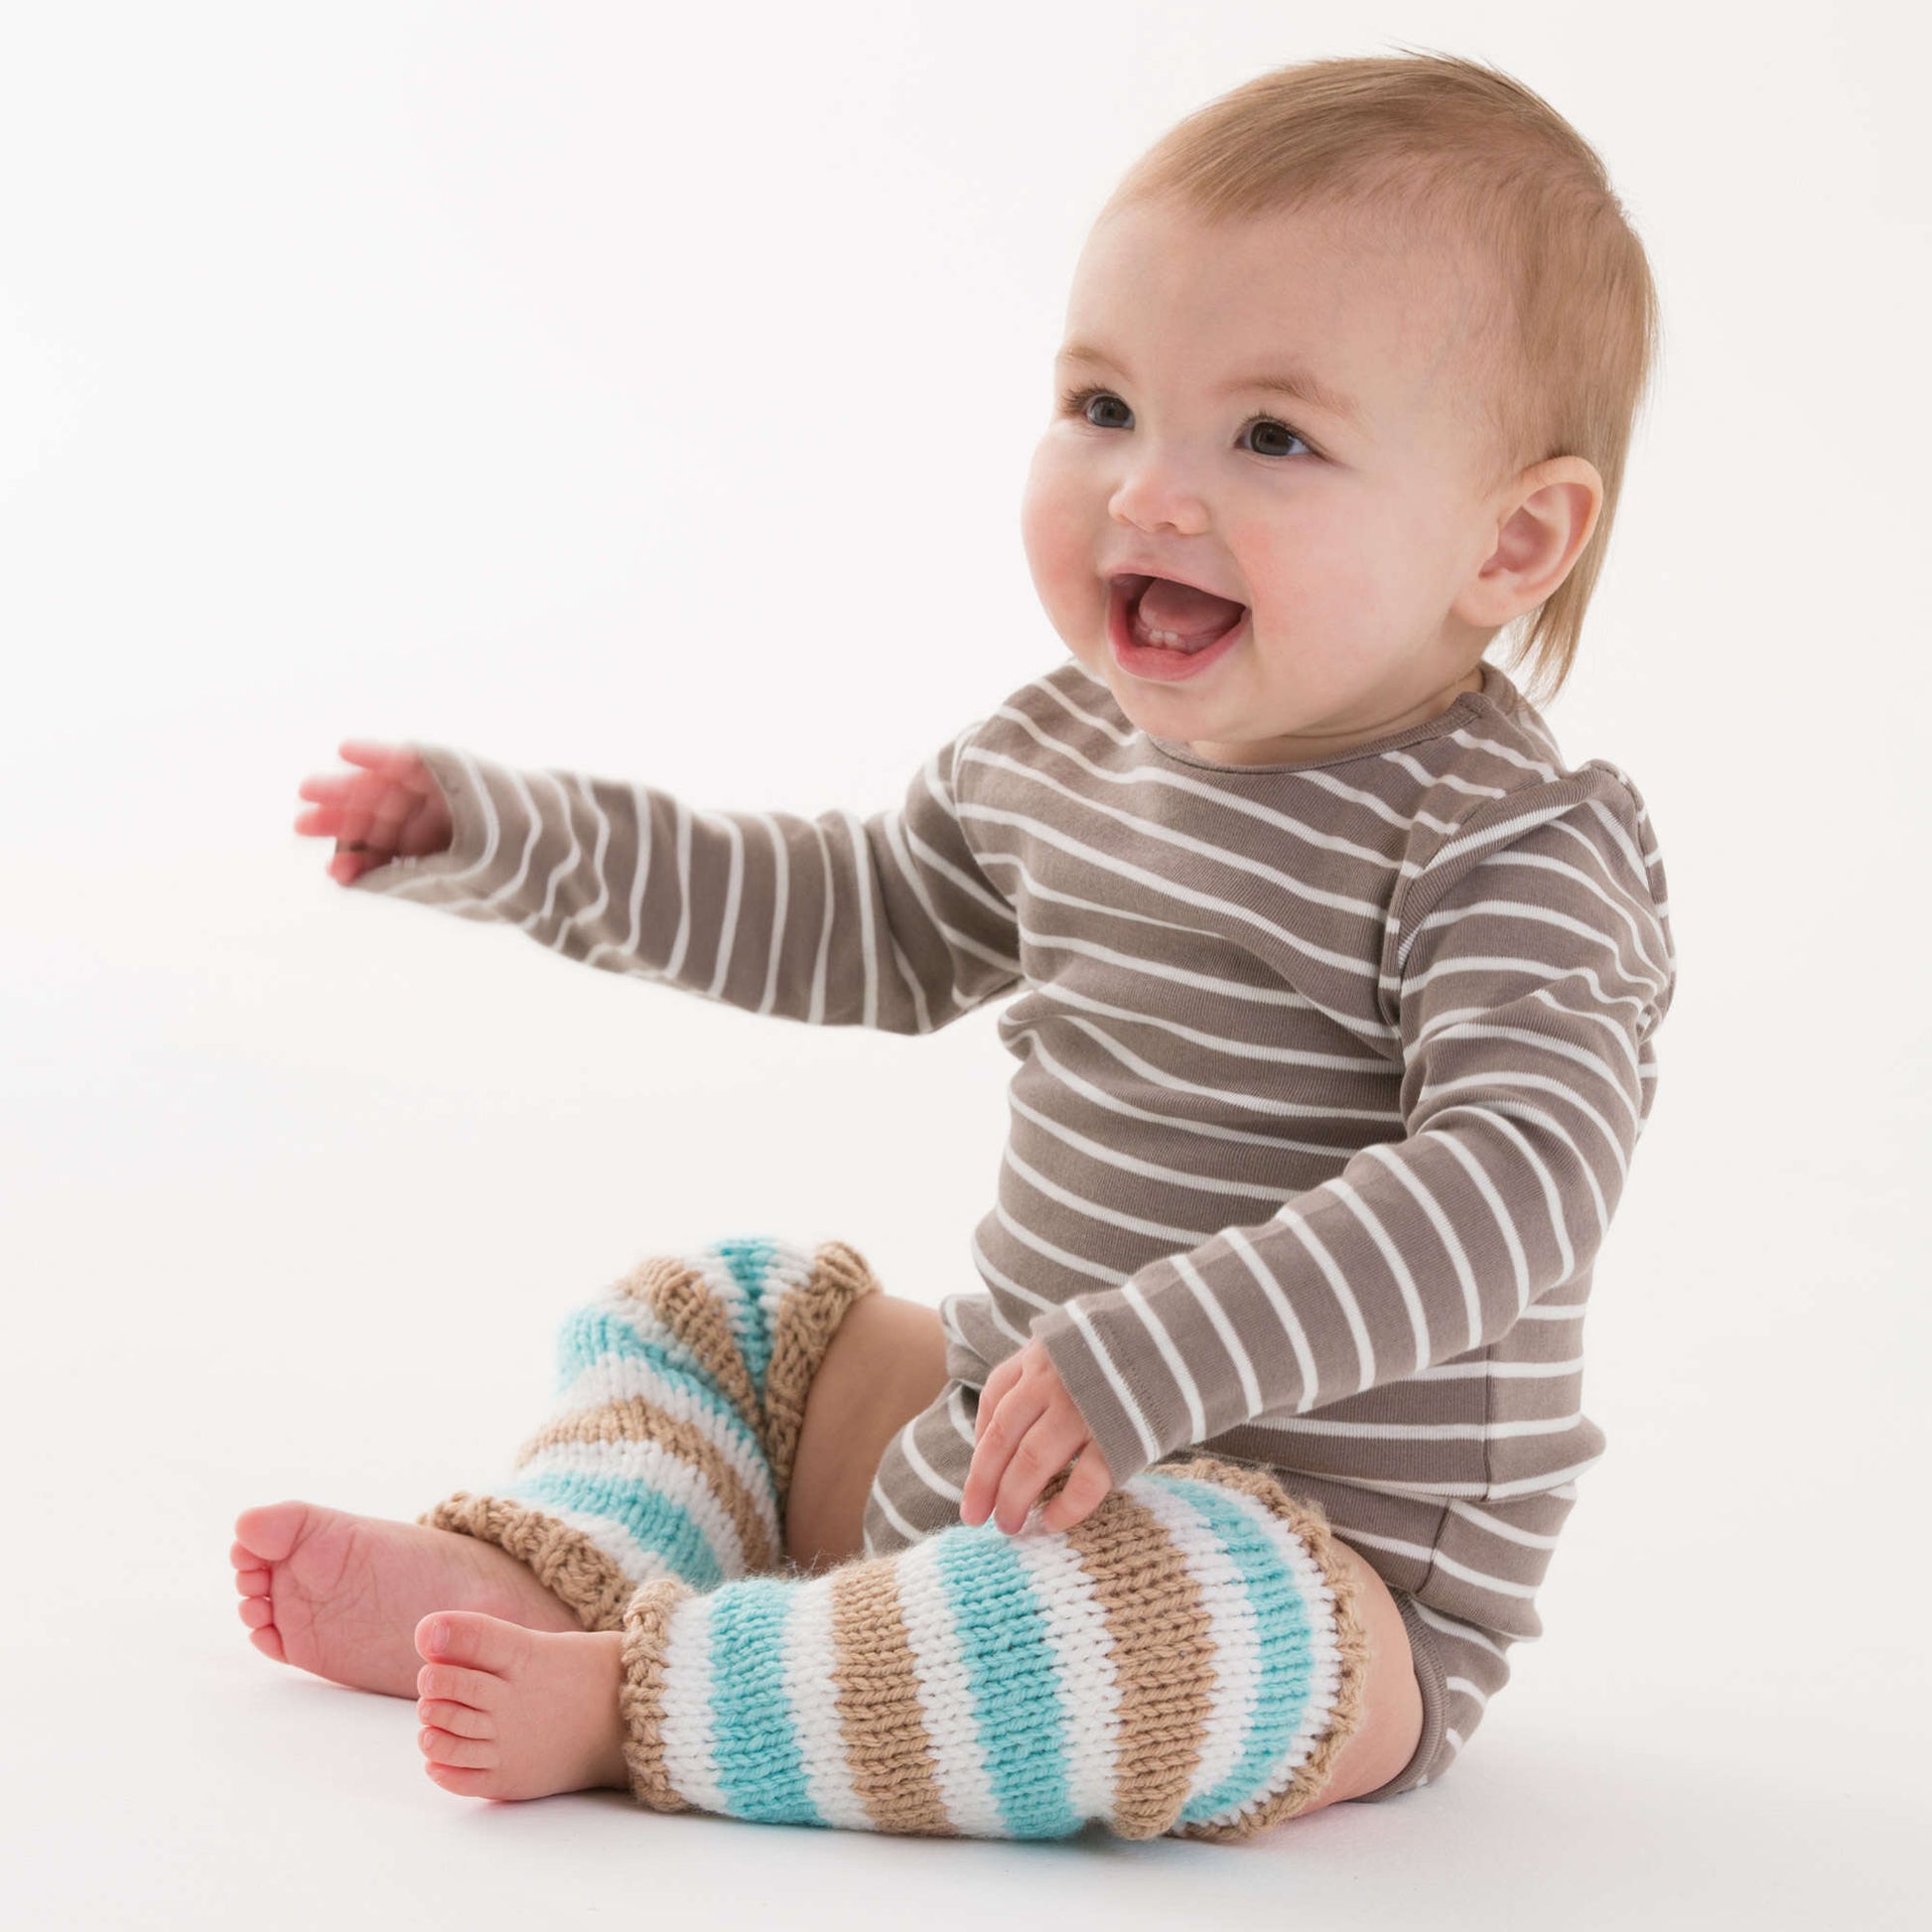 Free Red Heart Simple Striped Baby Legwarmers Knit Pattern